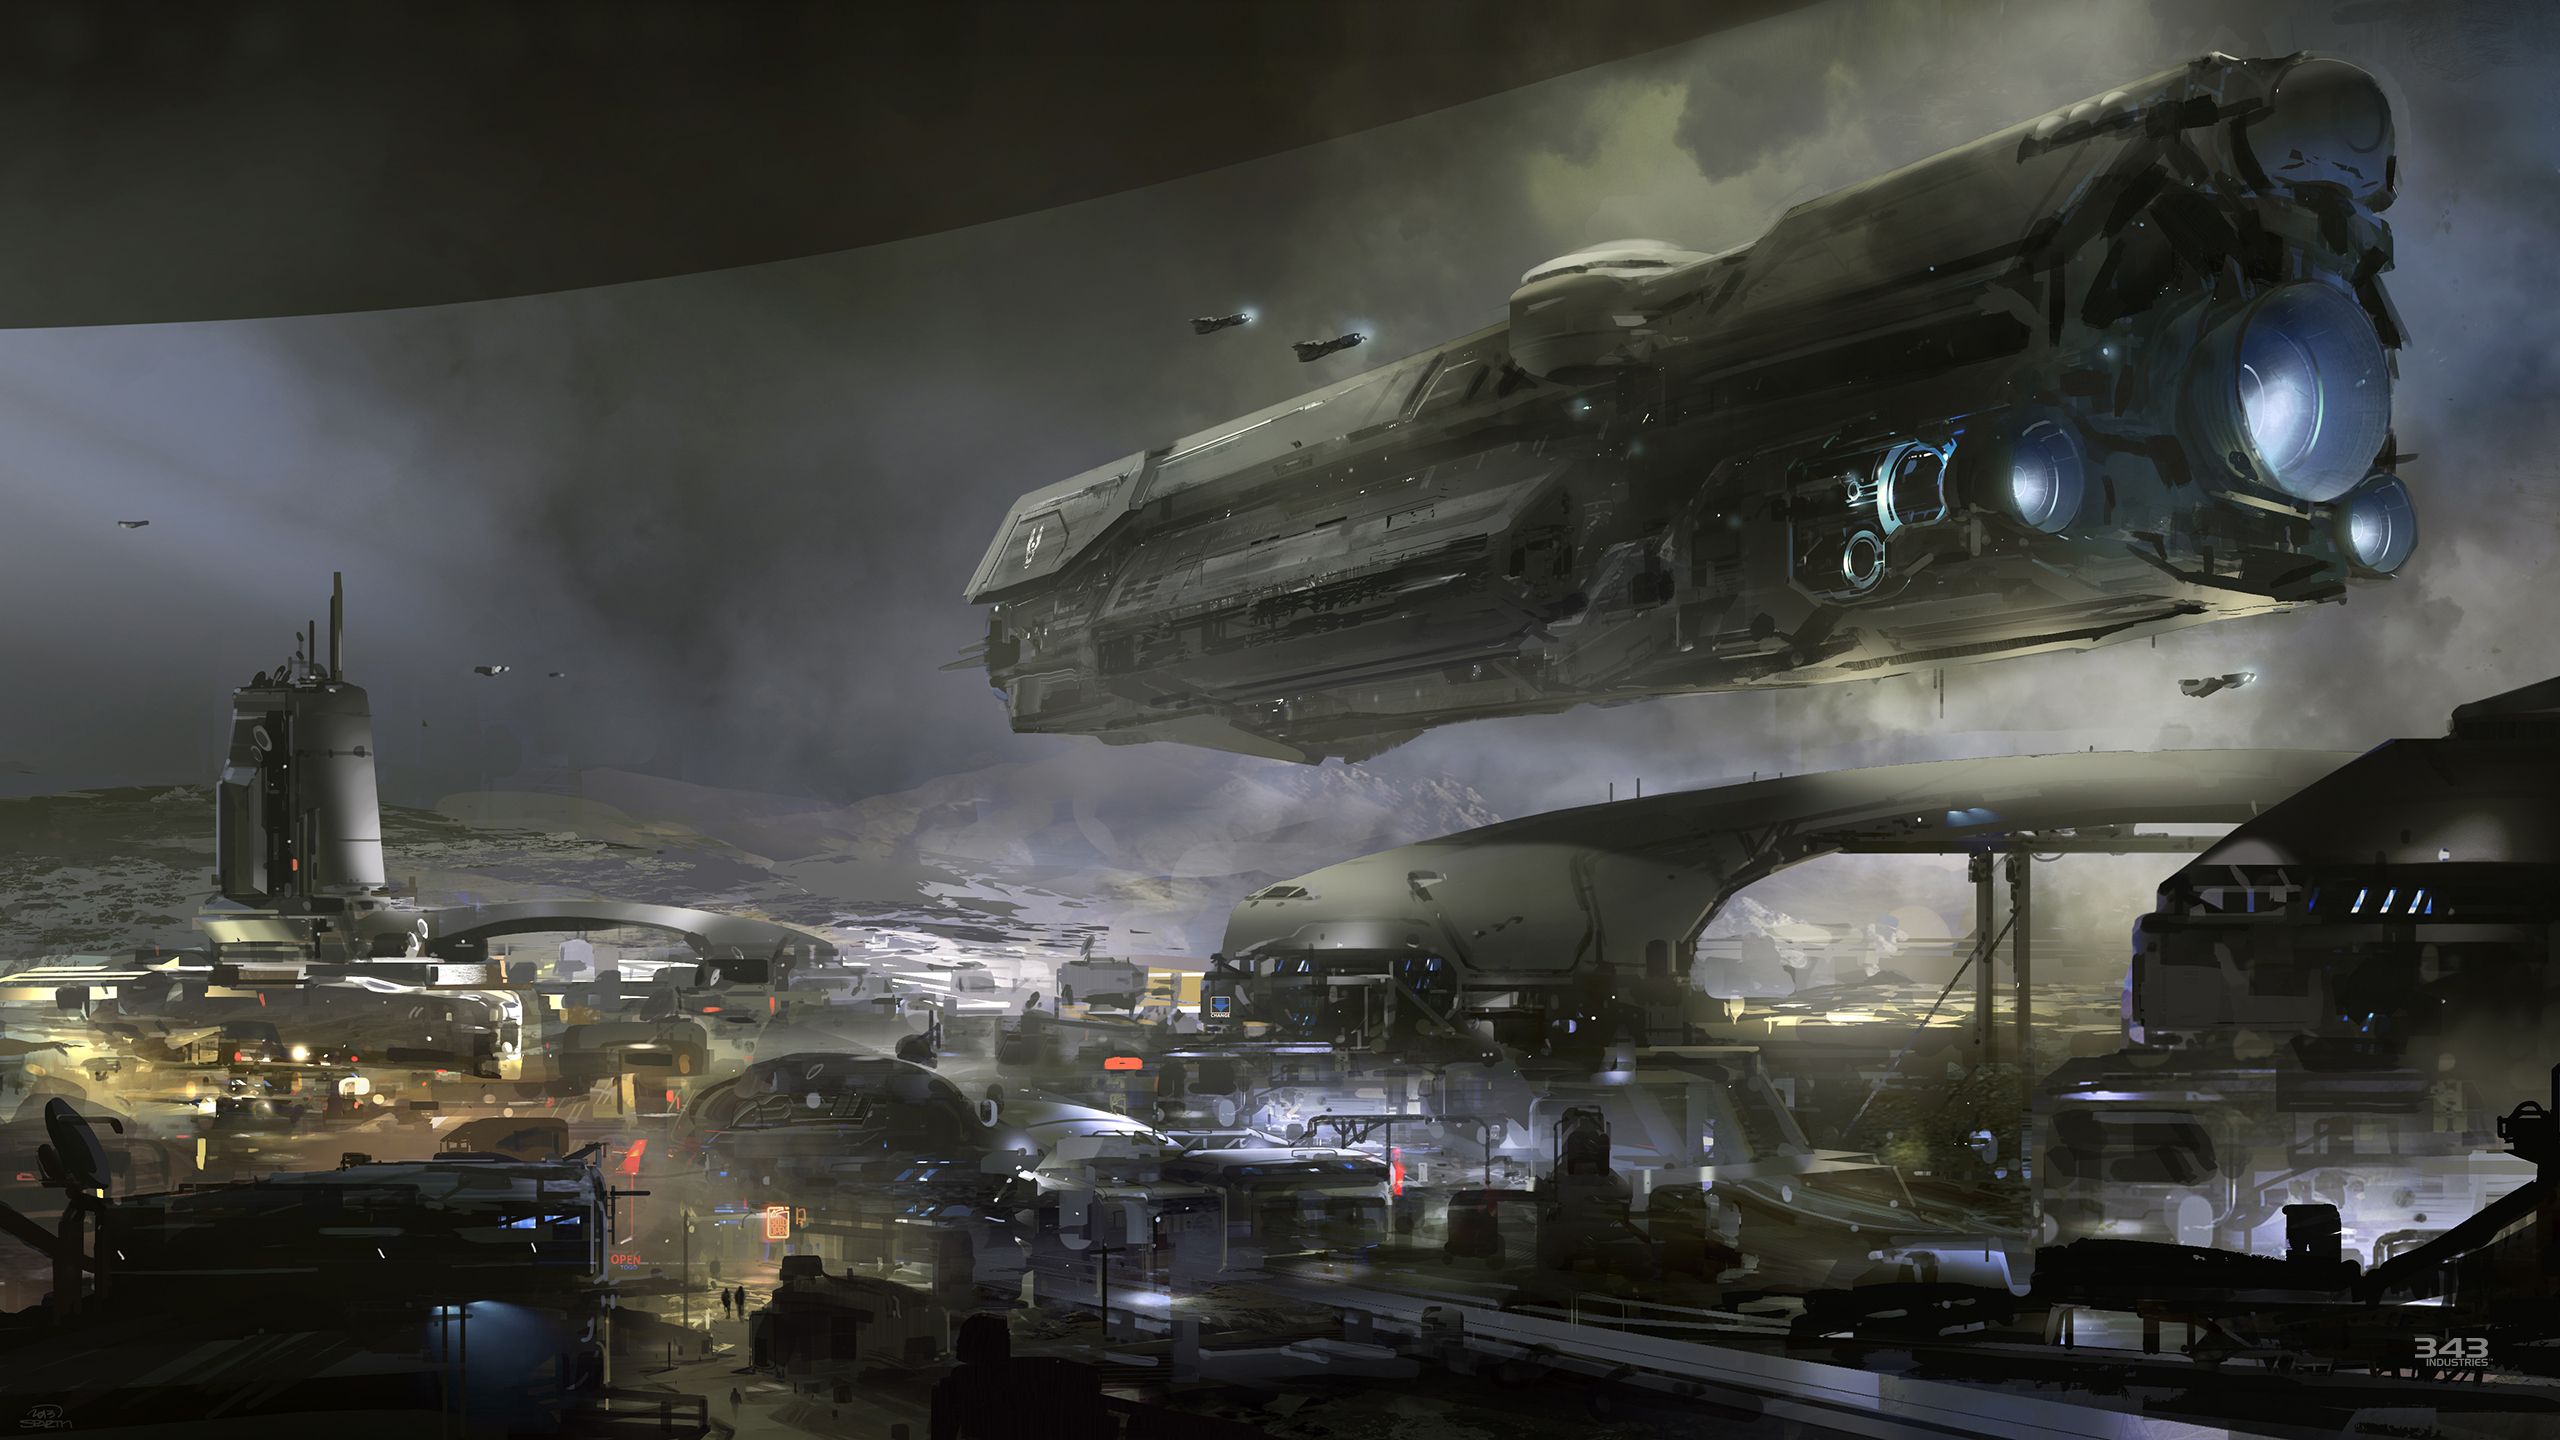 Has Shared A New Concept Artwork Of The Halo Game For Xbox One